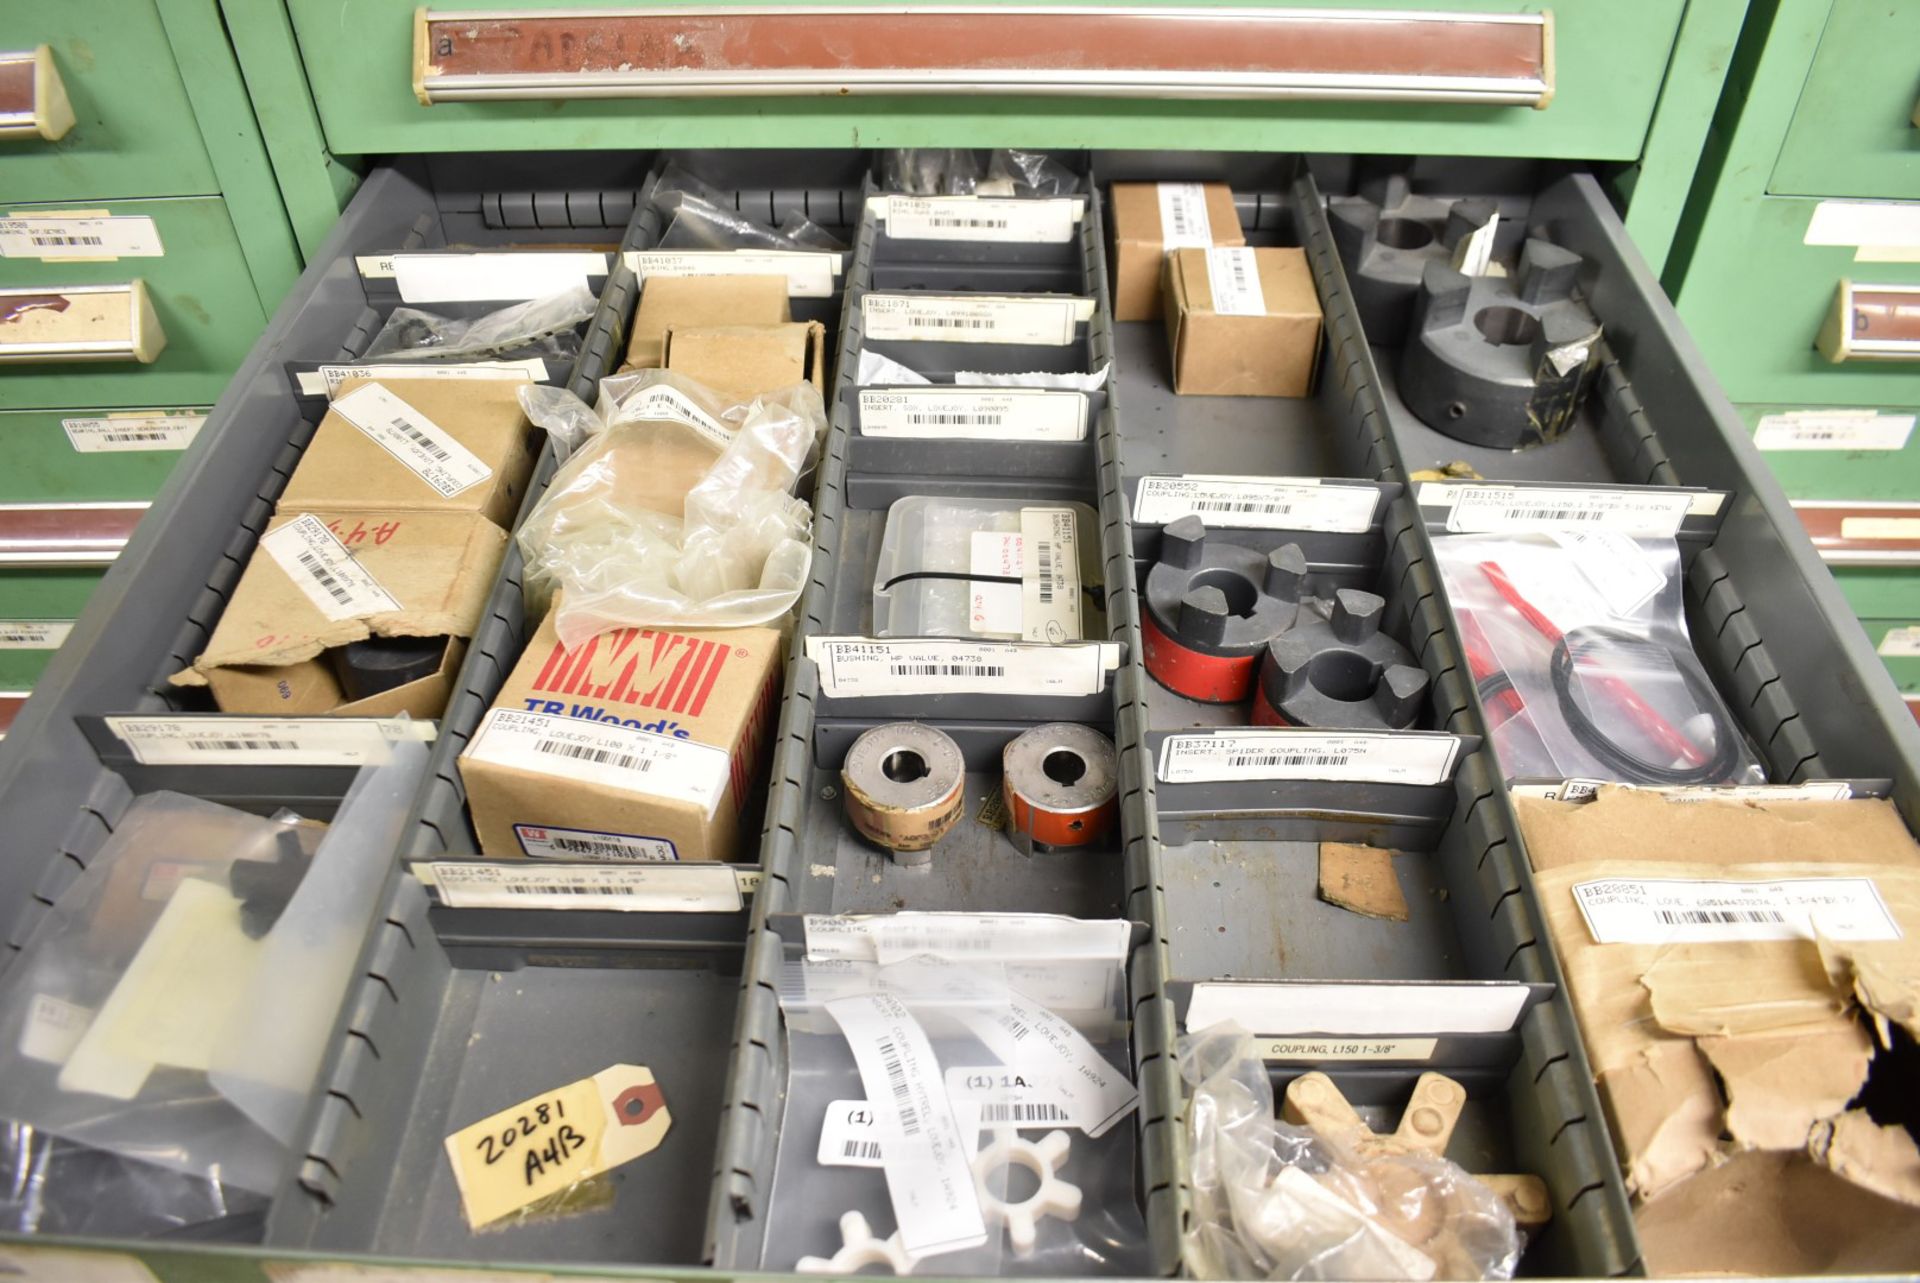 LOT/ CONTENTS OF CABINET - INCLUDING COUPLINGS, INSERTS, SLEEVES, LINKS, SEALS (TOOL CABINET NOT - Image 3 of 8